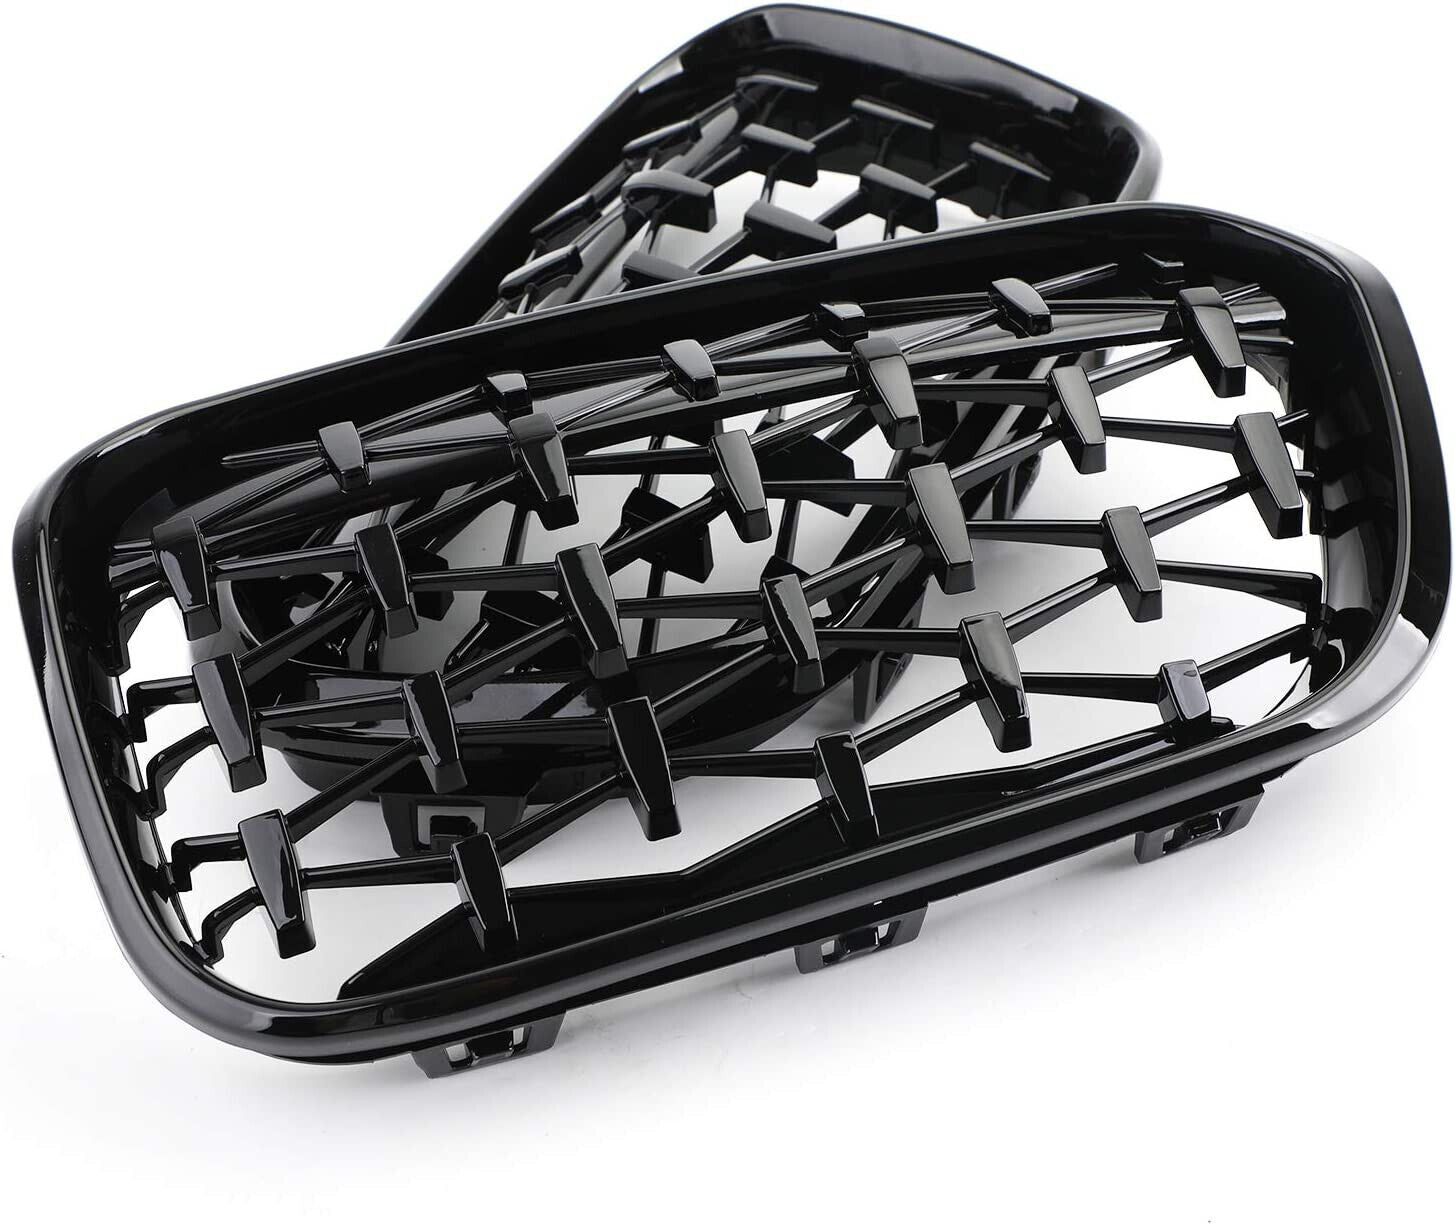 1 Pair Front Kidney Diamond Grills For Bmw 1 Series F20 F21 2010-2014